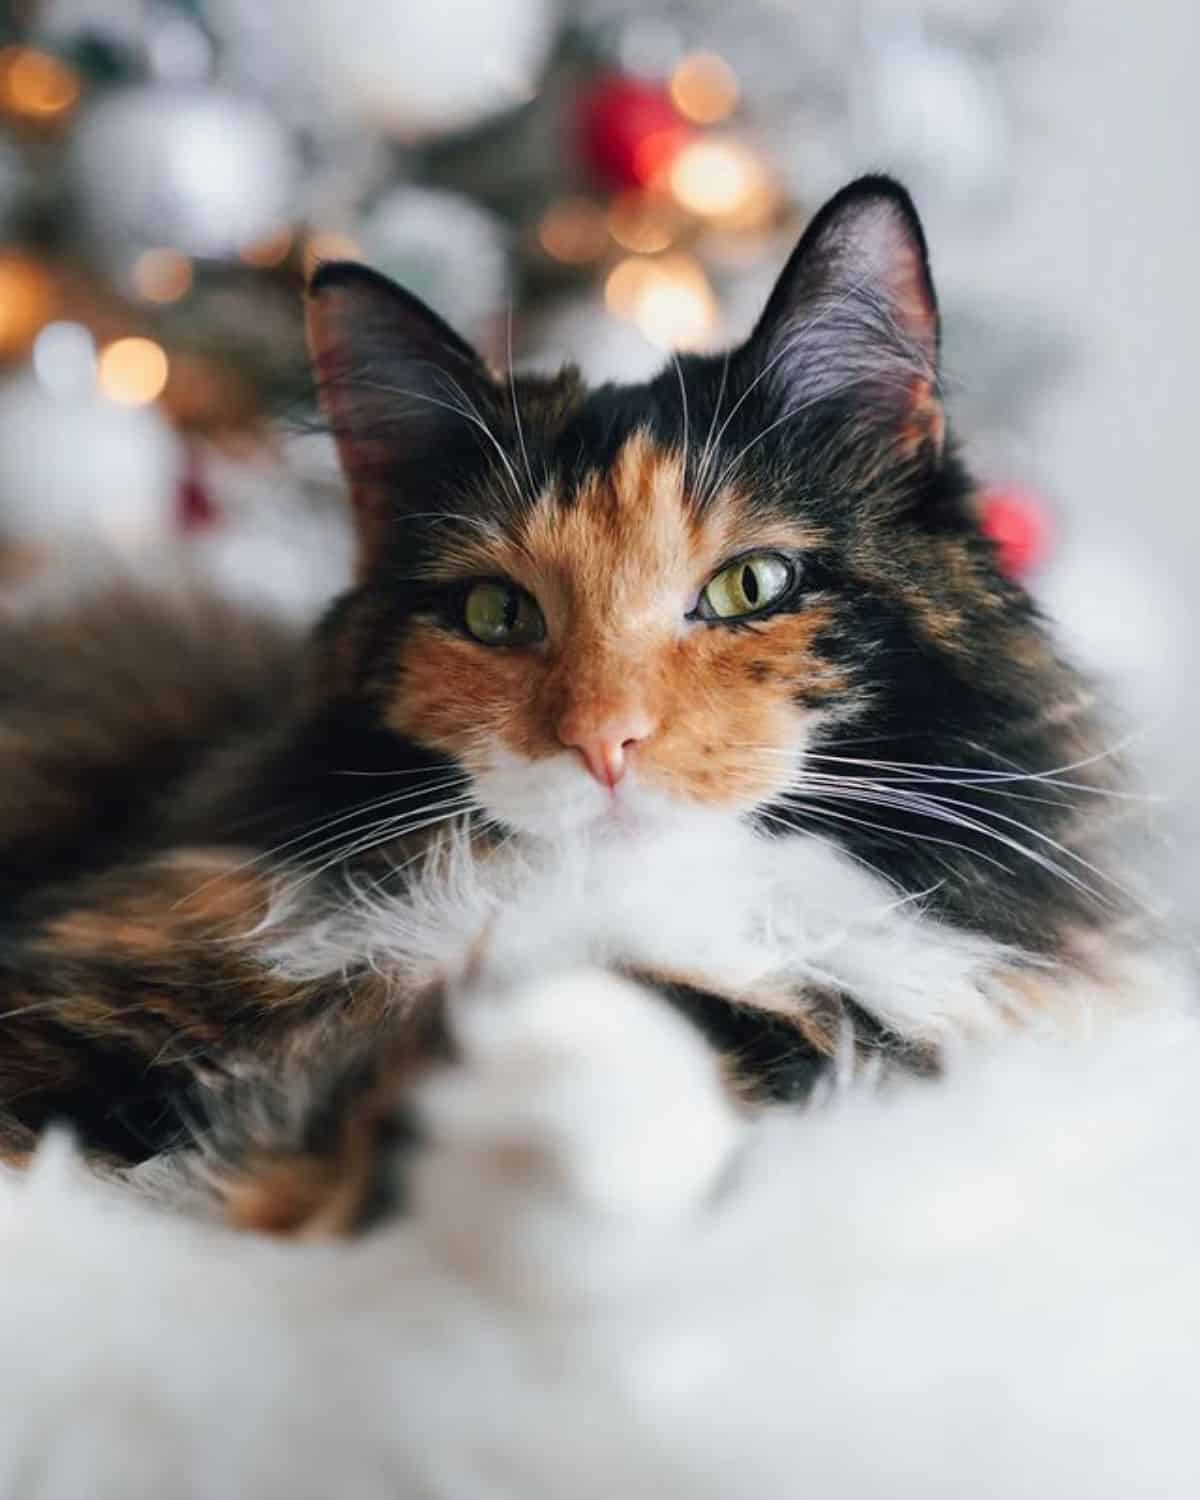 A close-up of a beautiful calico maine coon lying on a white fur.